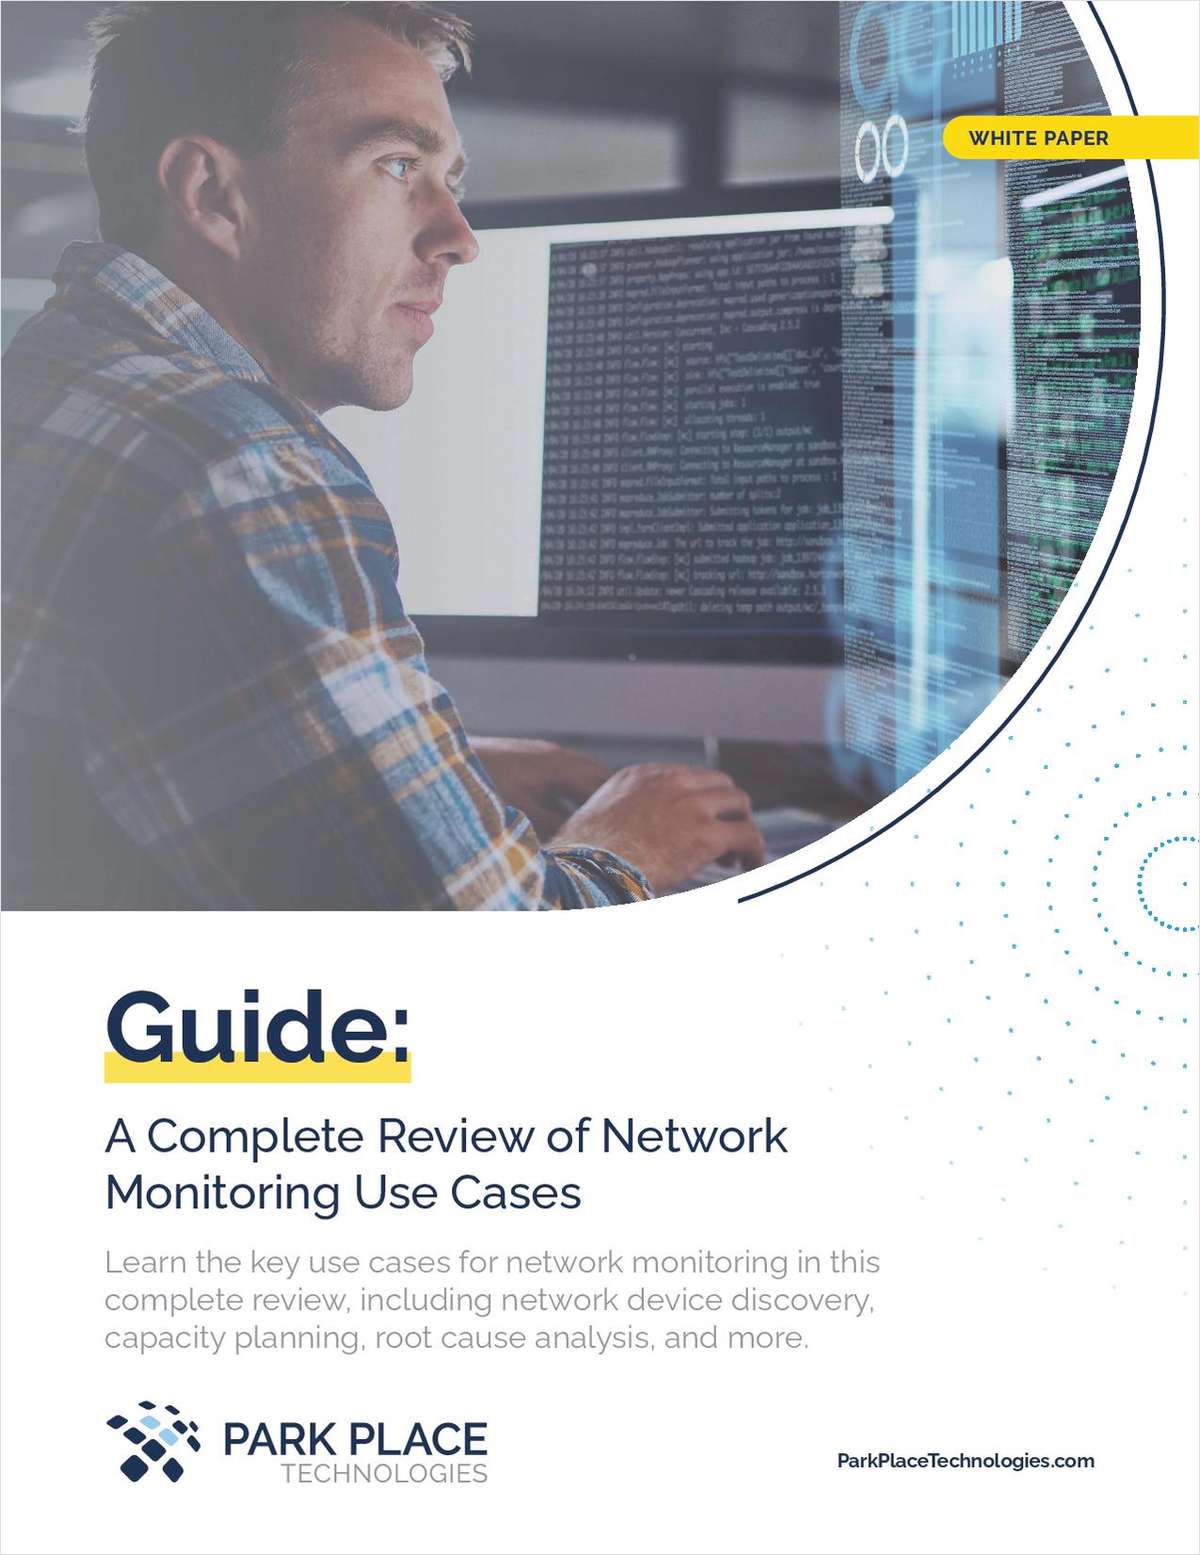 7 Network Monitoring Use Cases